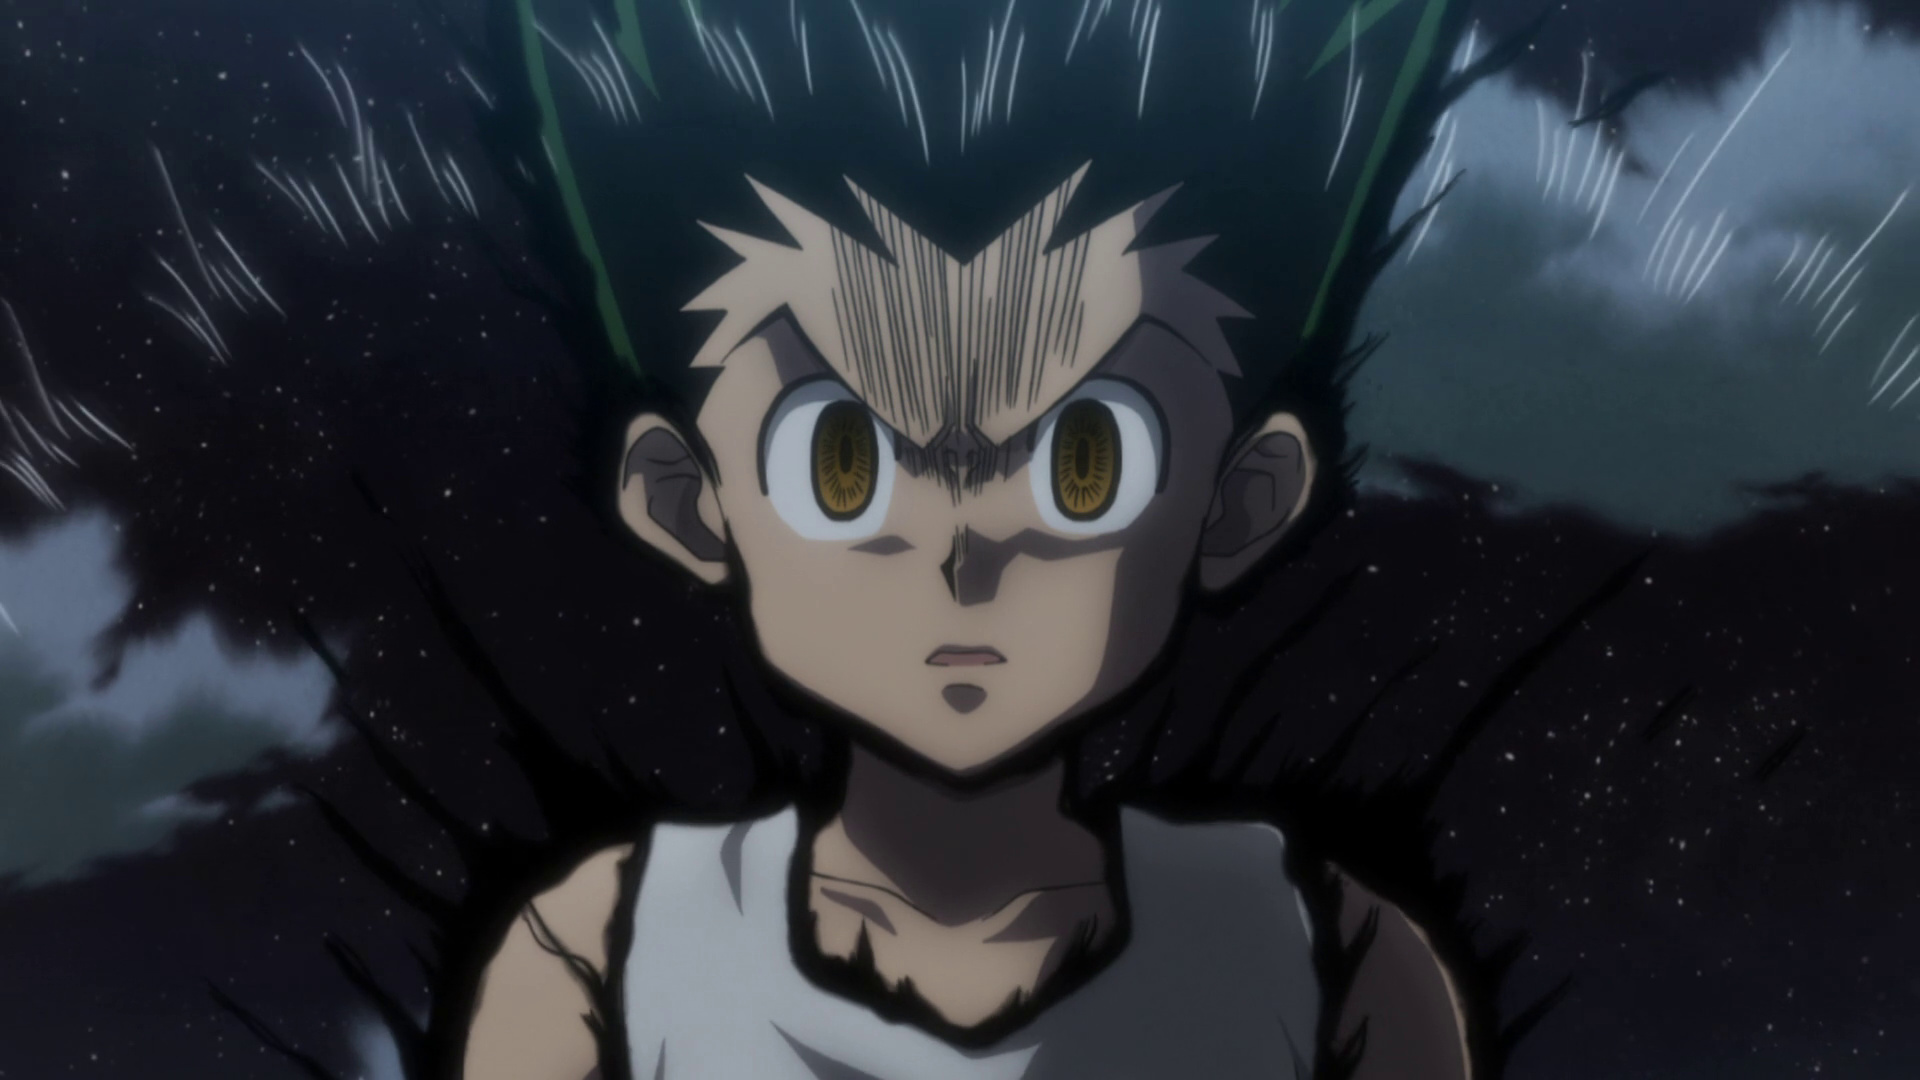 Gon Freecss: Anime character showing exceptional talent in his mastery of Nen, An Enhancer. 1920x1080 Full HD Wallpaper.